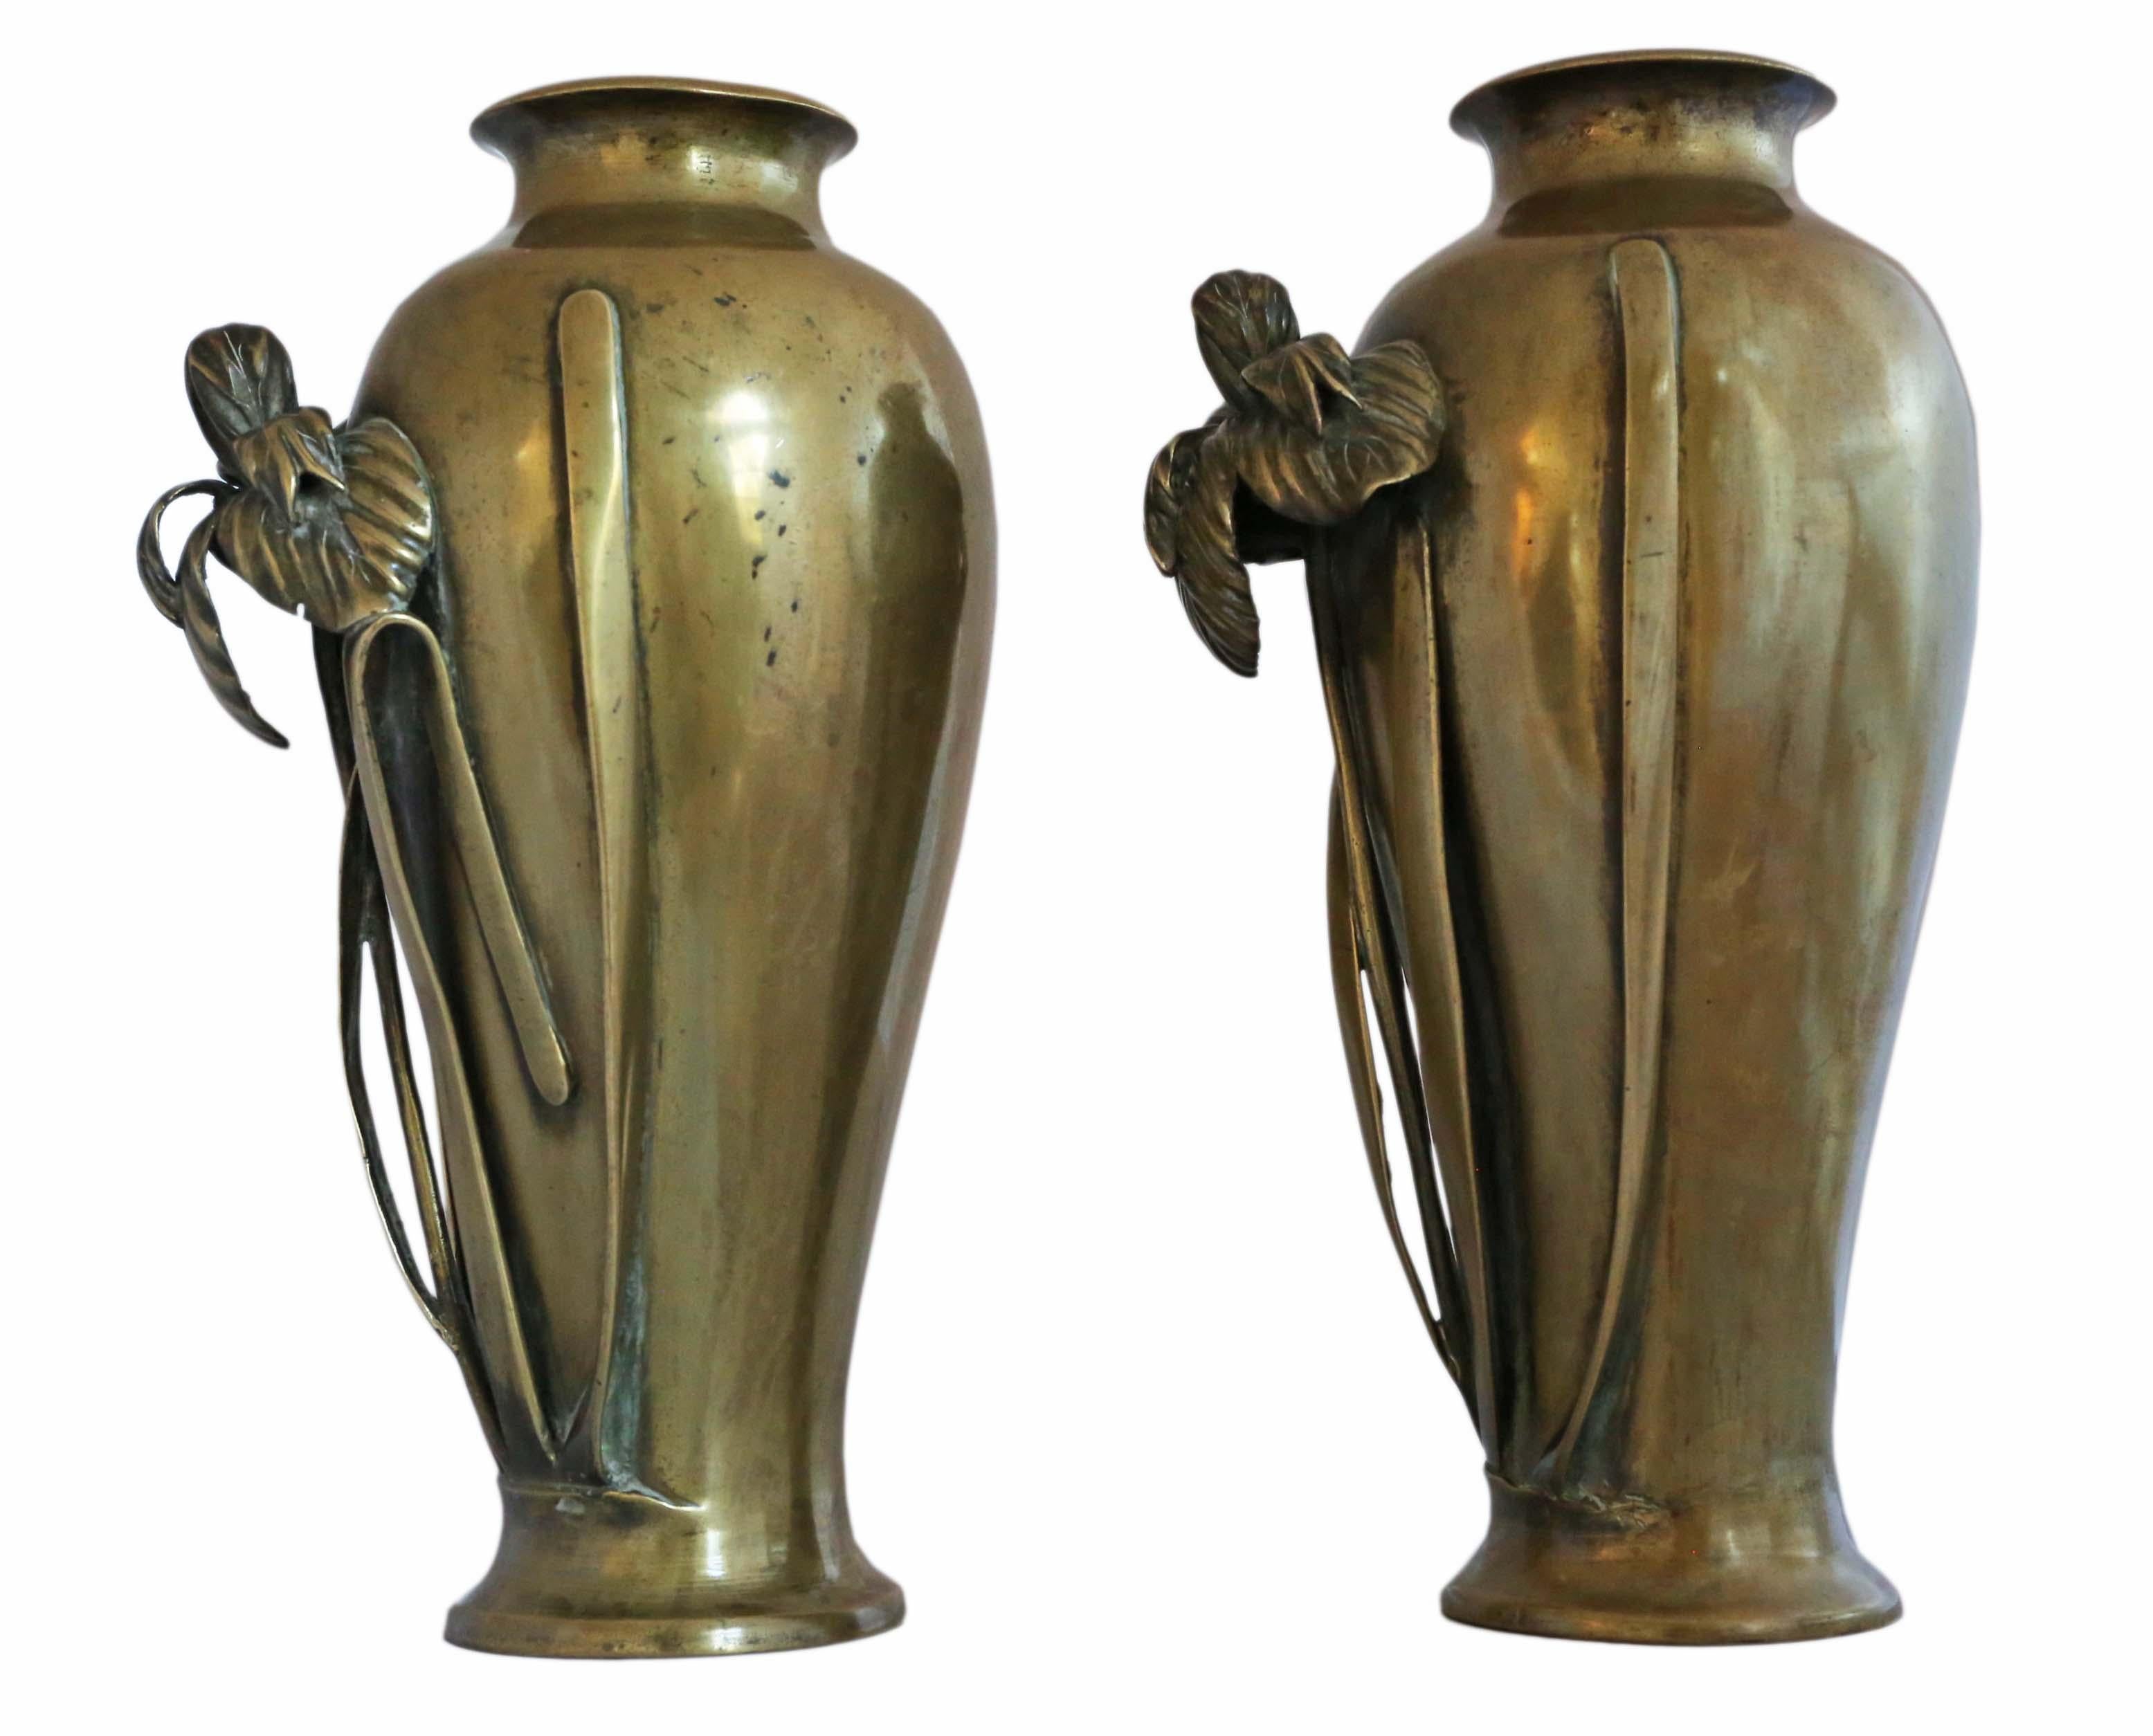 Antique large pair of fine quality Japanese bronze vases Meiji Period C1910. Artist pieces with signature stamp on the bases. Iris relief decoration with a beautiful organic form.

Would look amazing in the right location. Rare large size and